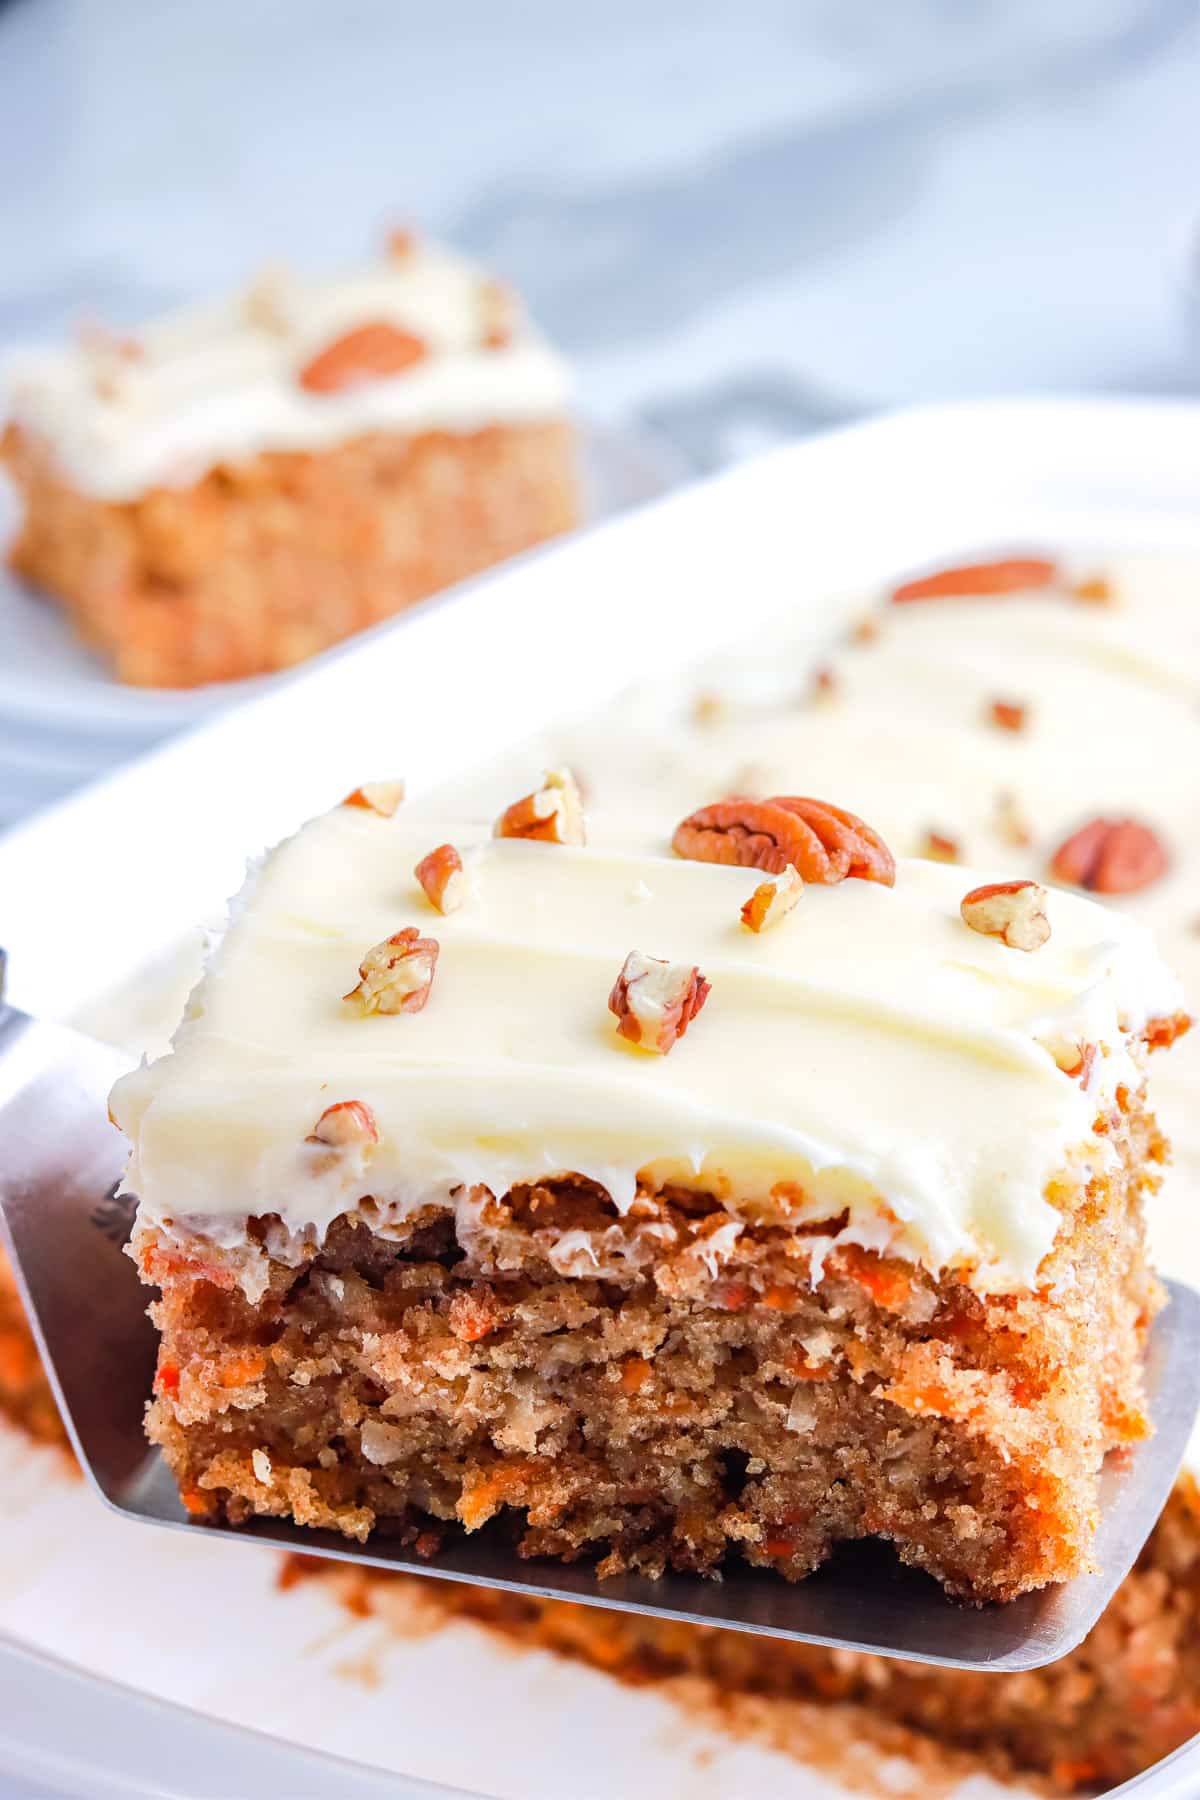 A up close picture of the carrot cake.